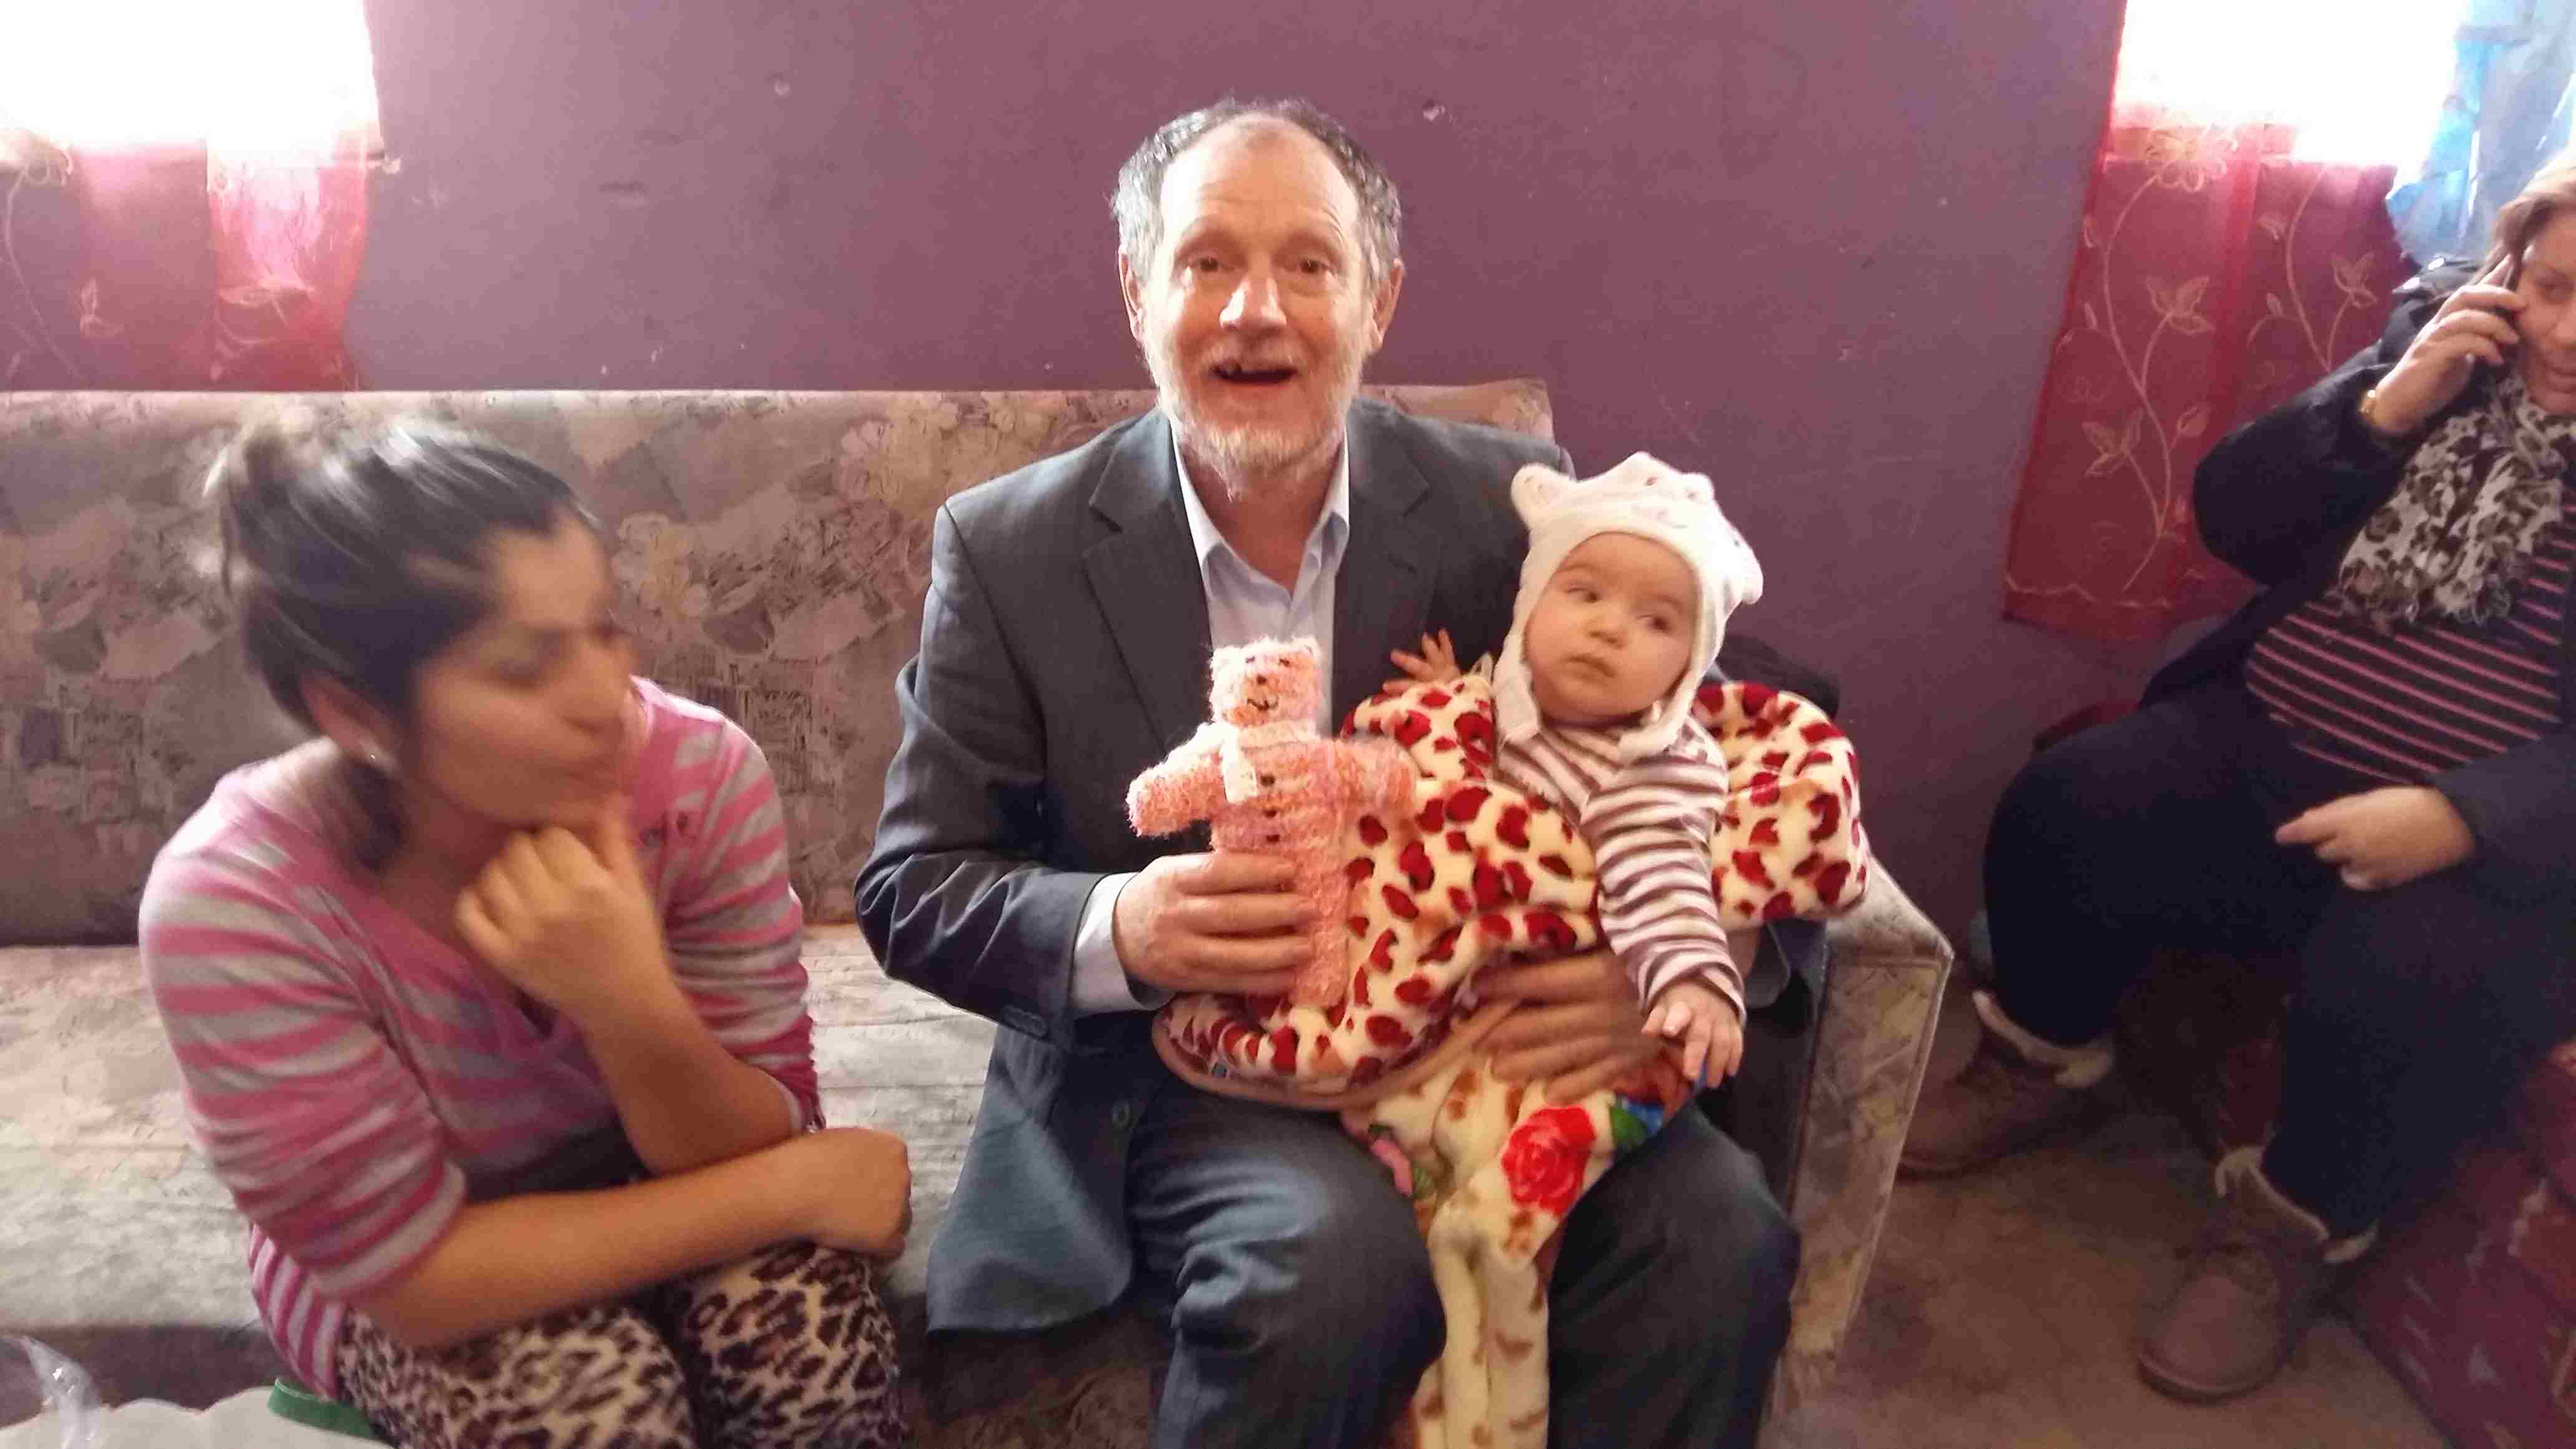 Pastor Lajos with Annmaries baby girl, Szofi